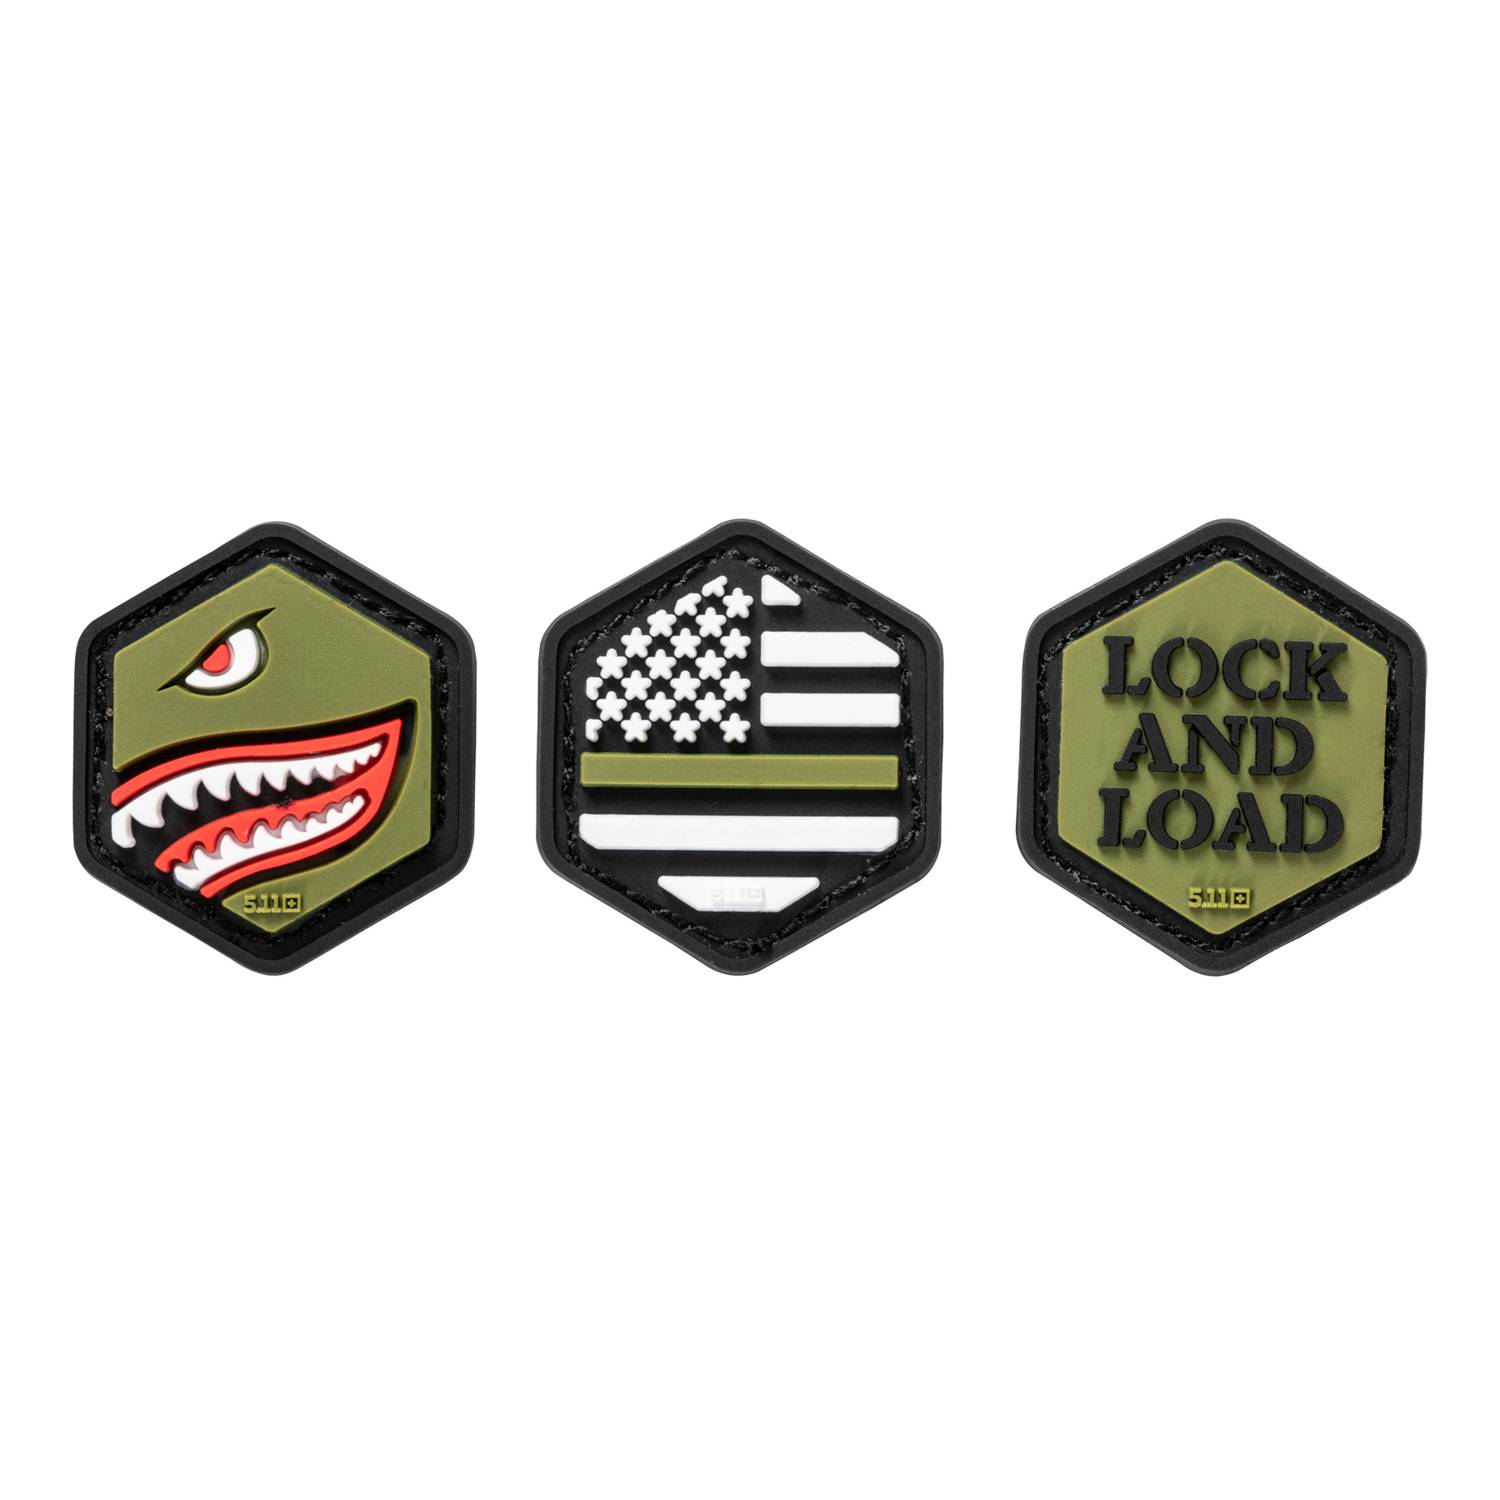 NEW SET OF 3 5.11 TACTICAL HEX GRID PATCH GLOW IN THE DARK SPARTAN, FLAG,  SCOPE